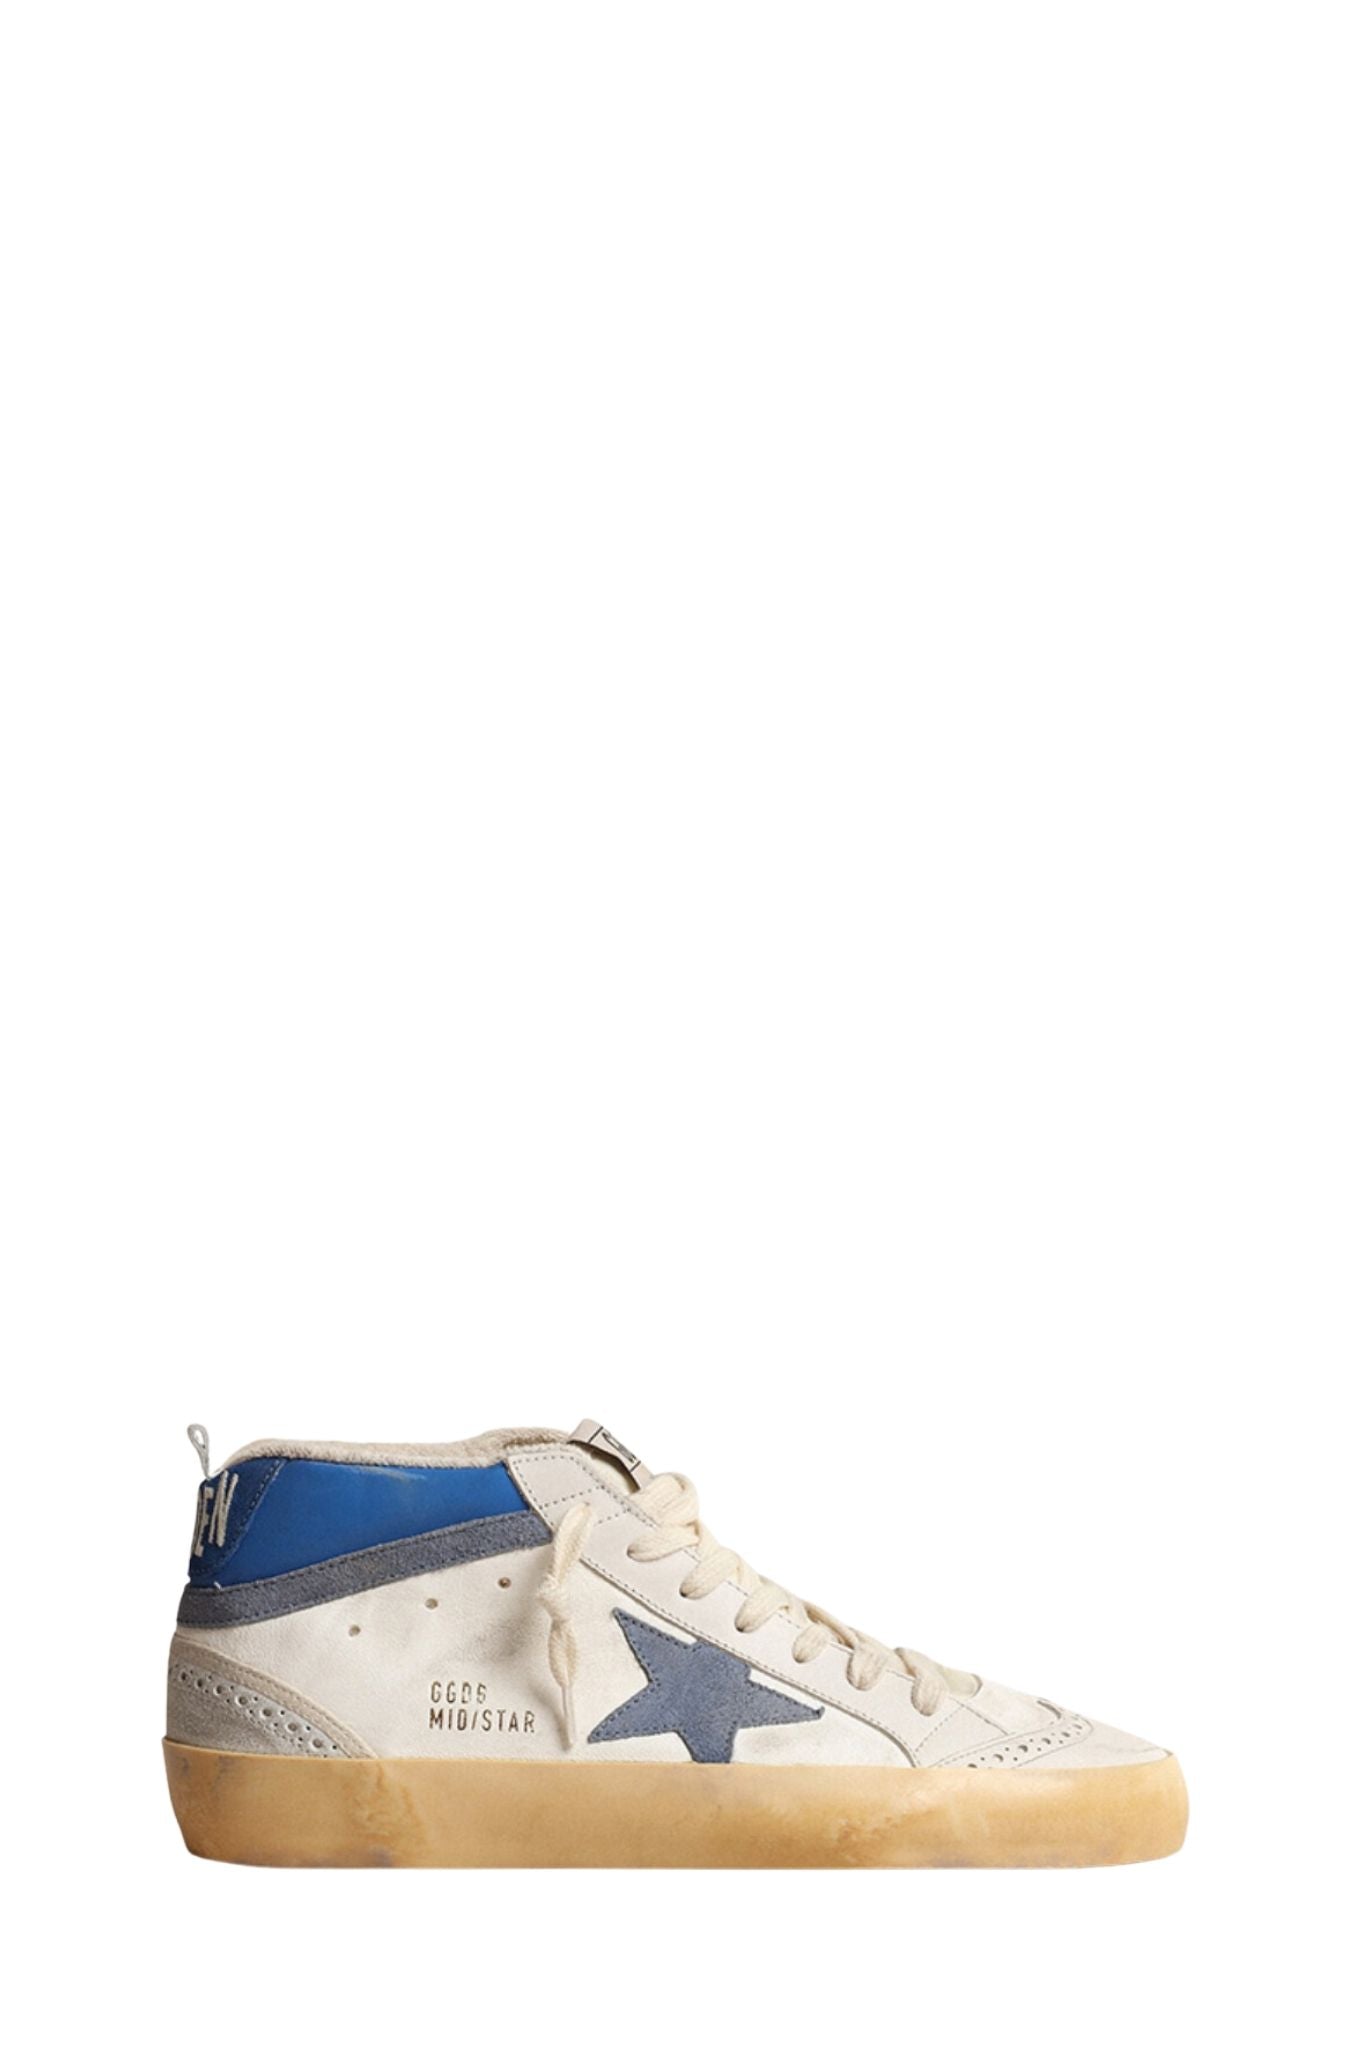 Golden Goose Mid star Suede and Leather